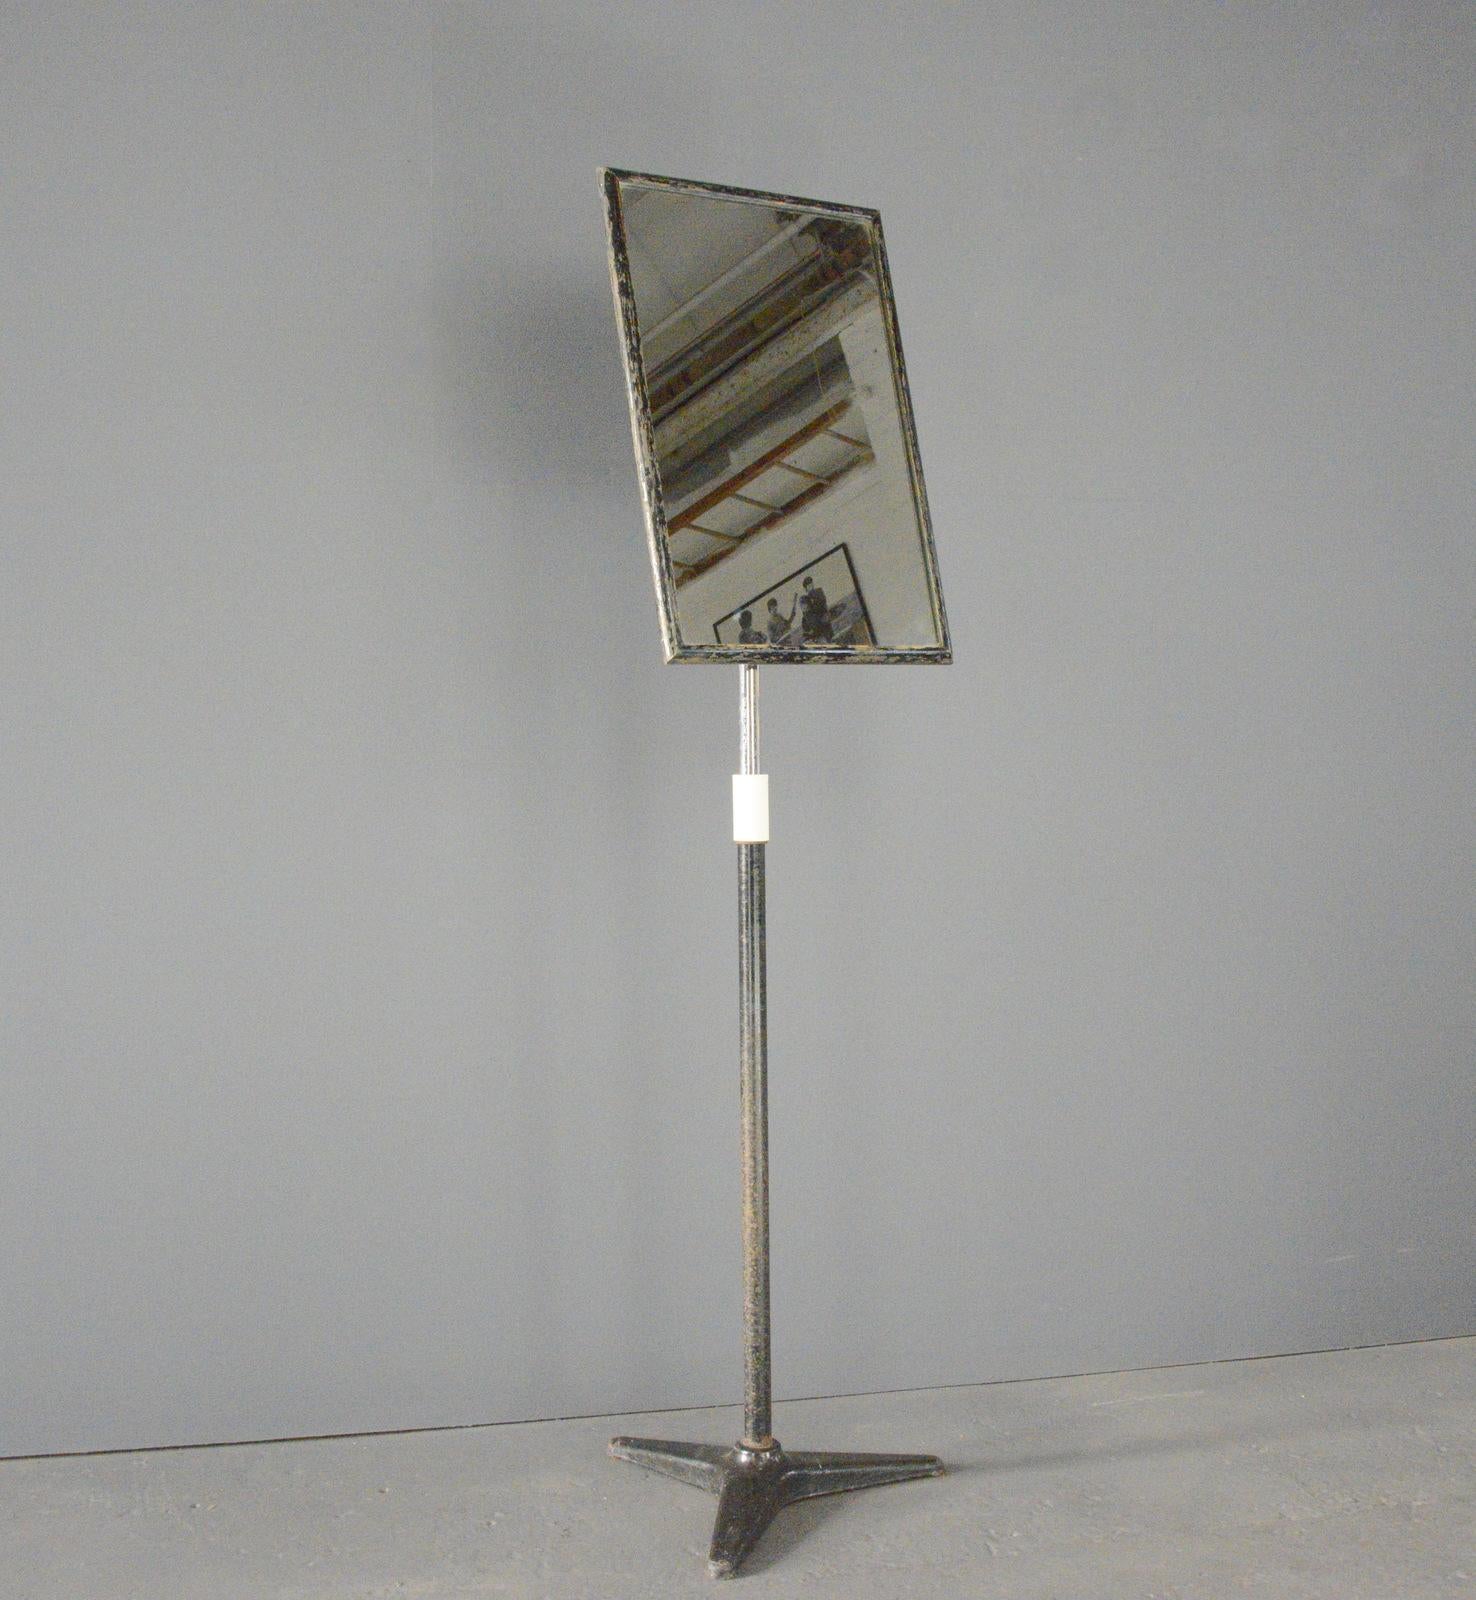 Opticians Shop Mirror Circa 1930s

- Cast iron base
- Ebonized wooden frame 
- Nickel plated stem
- Telescopic/ height adjustable
- English ~ 1930s
- 38cm wide x 160cm tall at full extension

Condition Report

Some patina to the wooden frame
